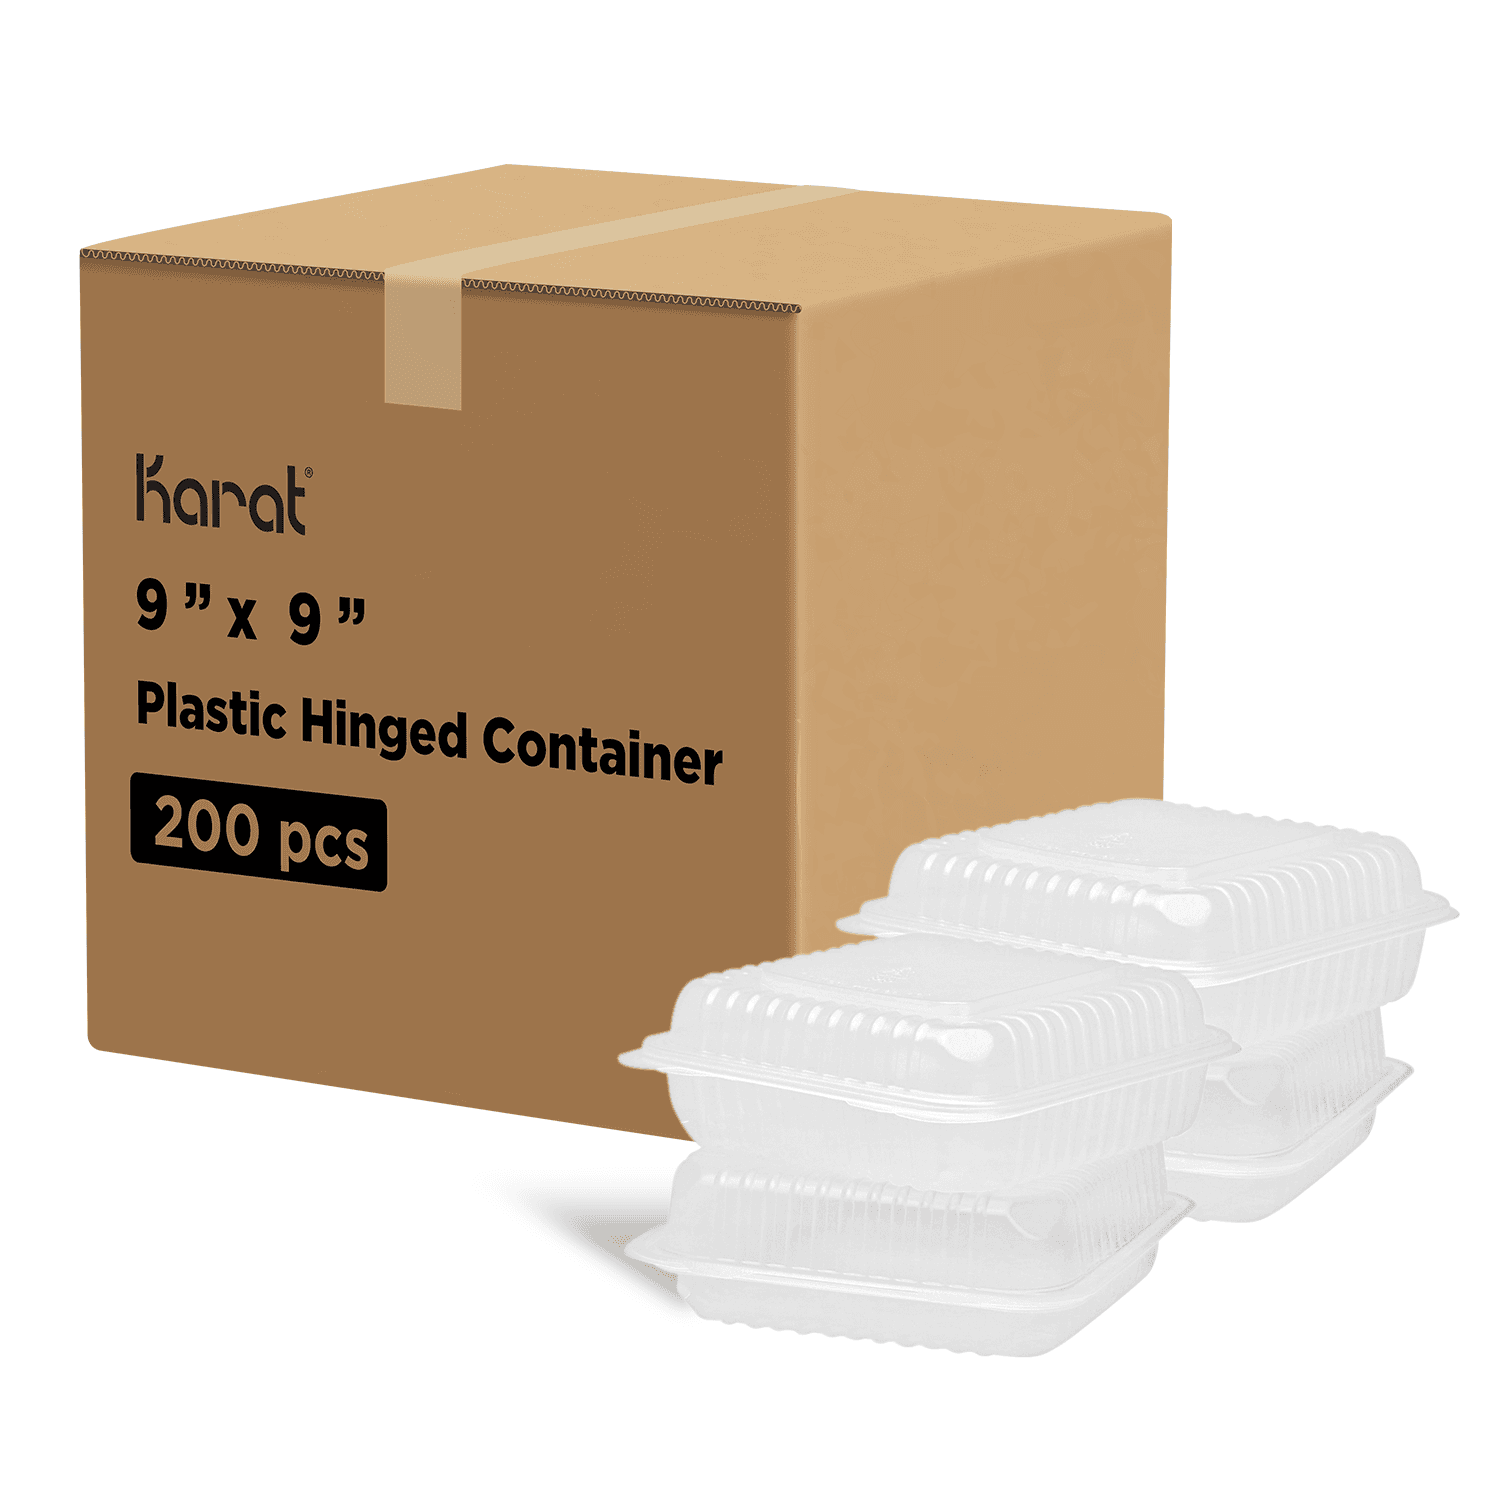 Clear Karat 9"x 9" PP Plastic Hinged Containers stacked next to packaging